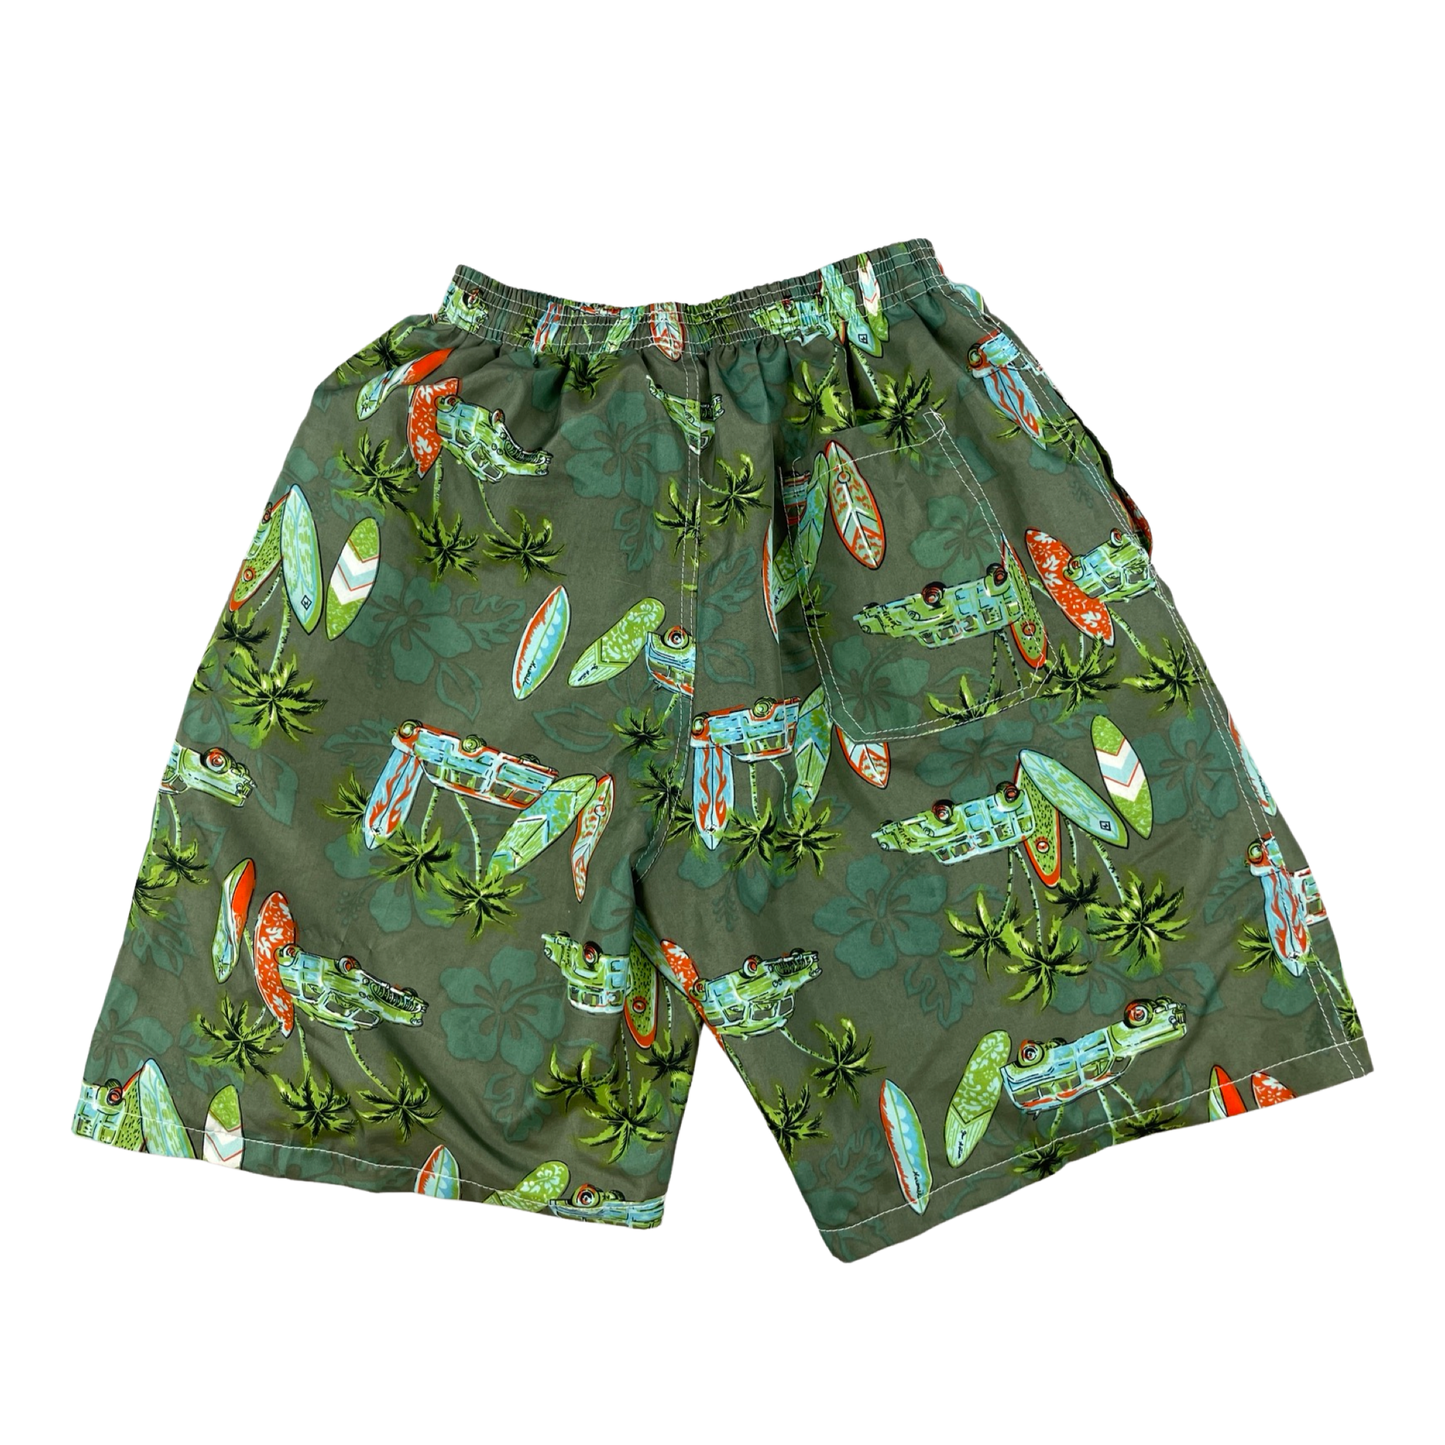 Vintage Printed Green Swimming Trunks S/M